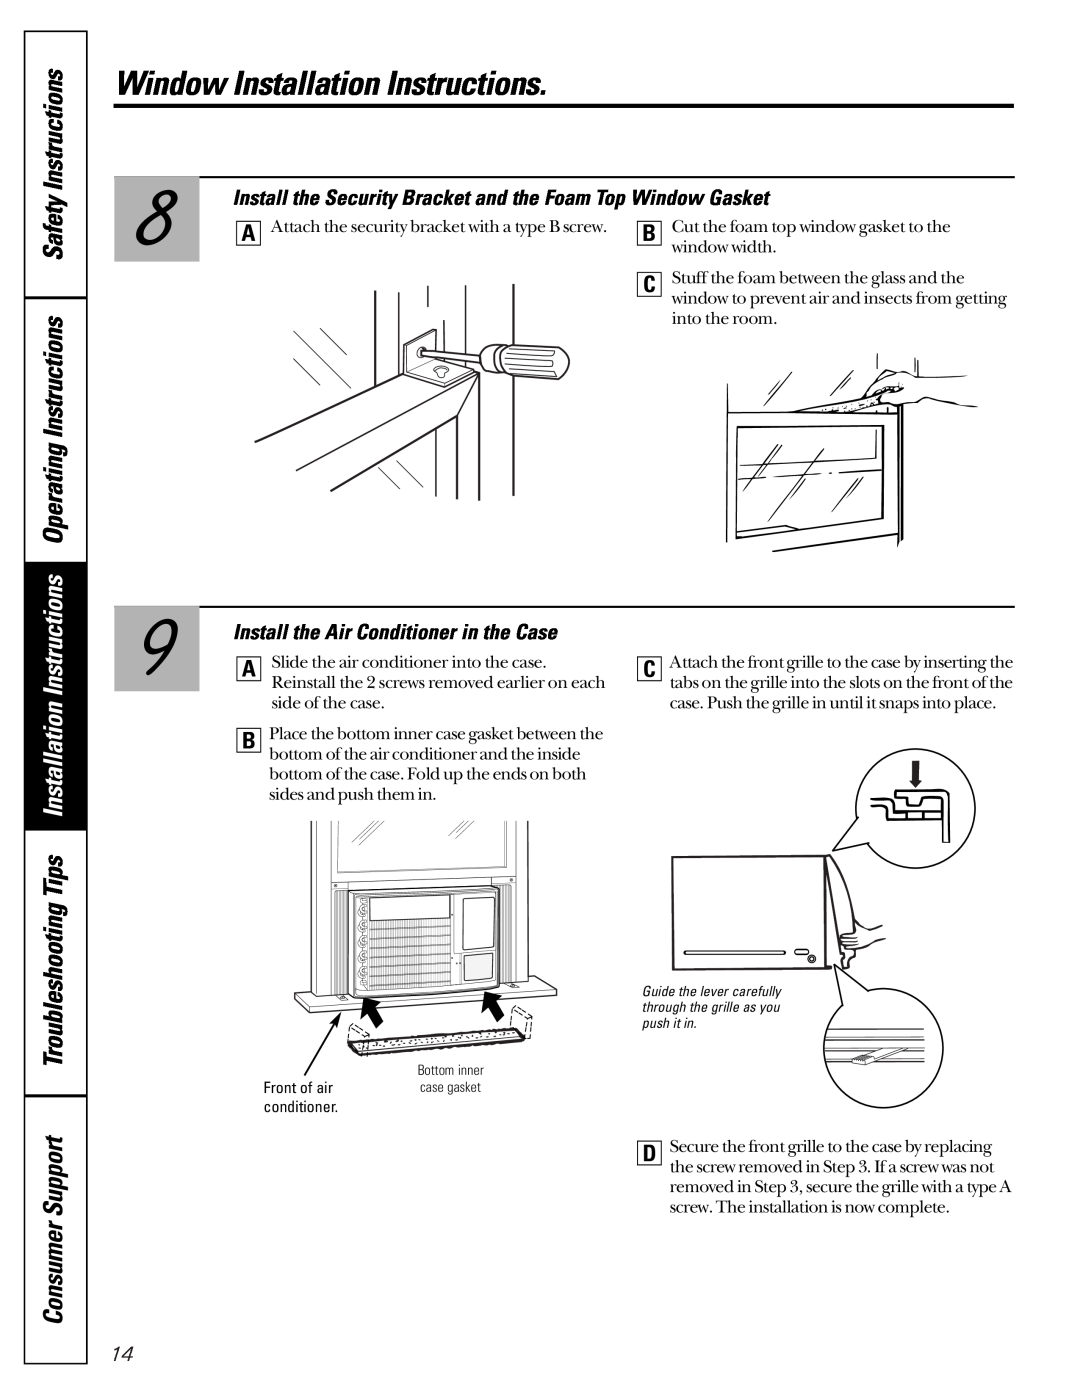 GE ASV12 Operating Instructions Safety Instructions, Consumer Support Troubleshooting, Window Installation Instructions 